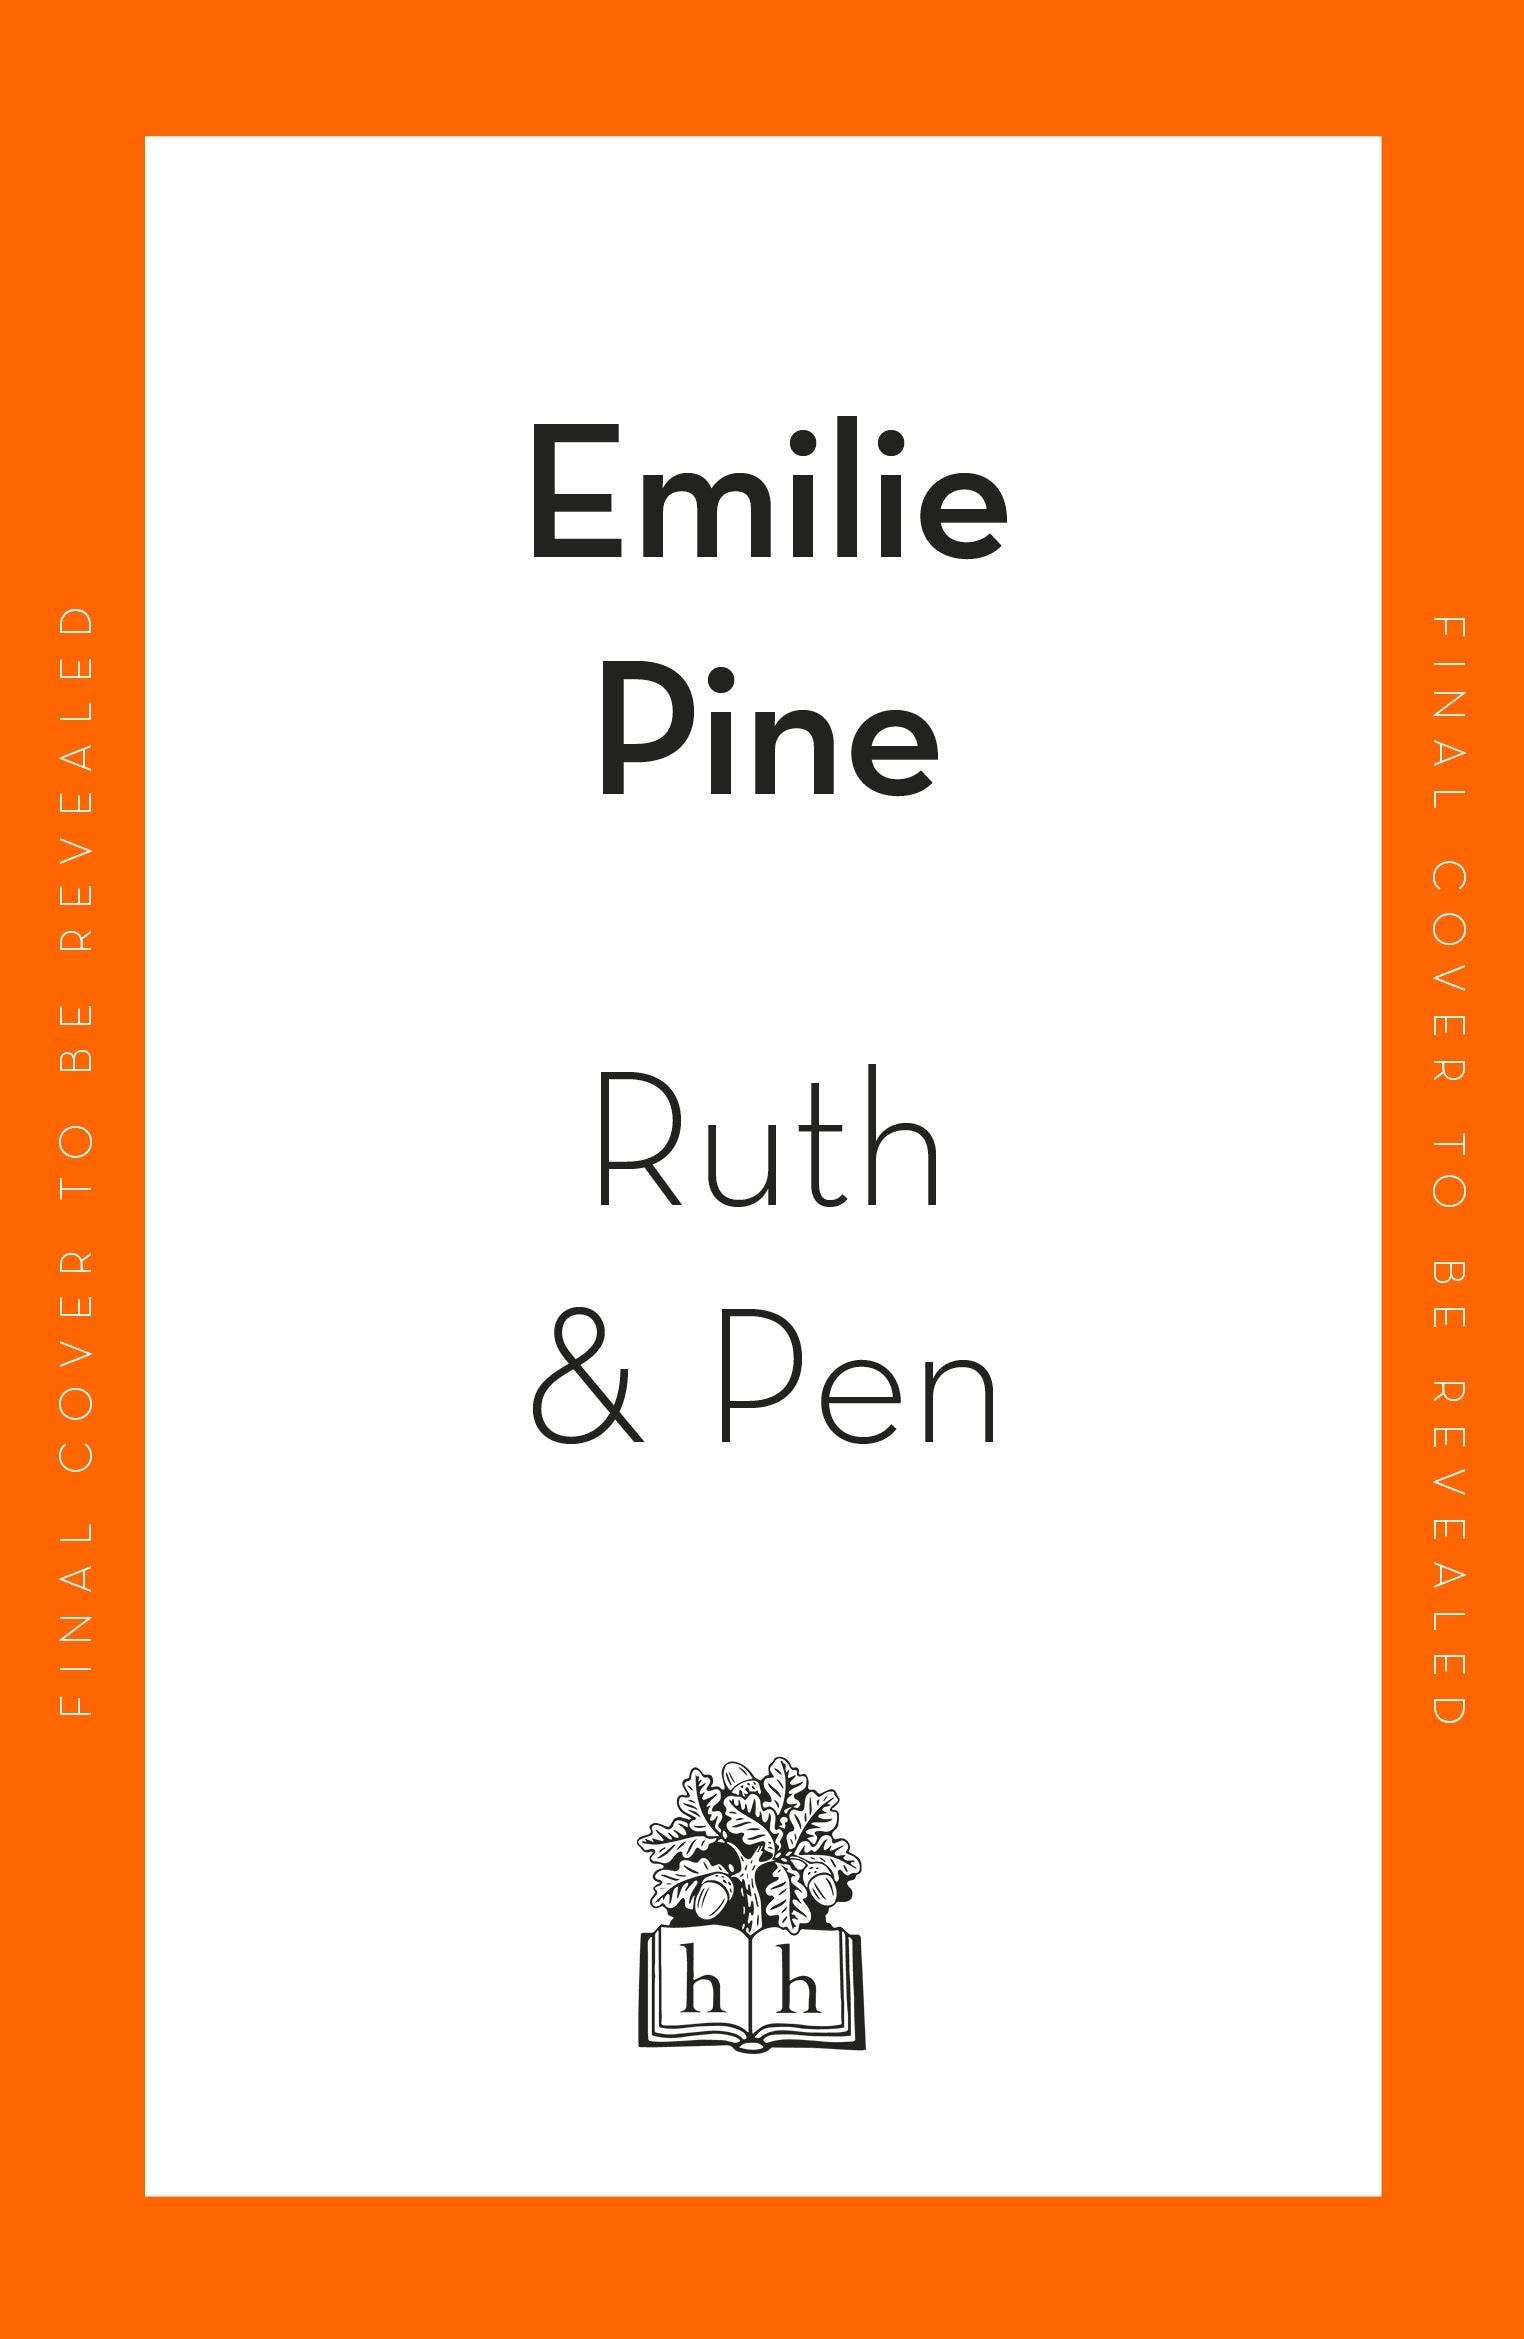 Book “Ruth & Pen” by Emilie Pine — May 5, 2022